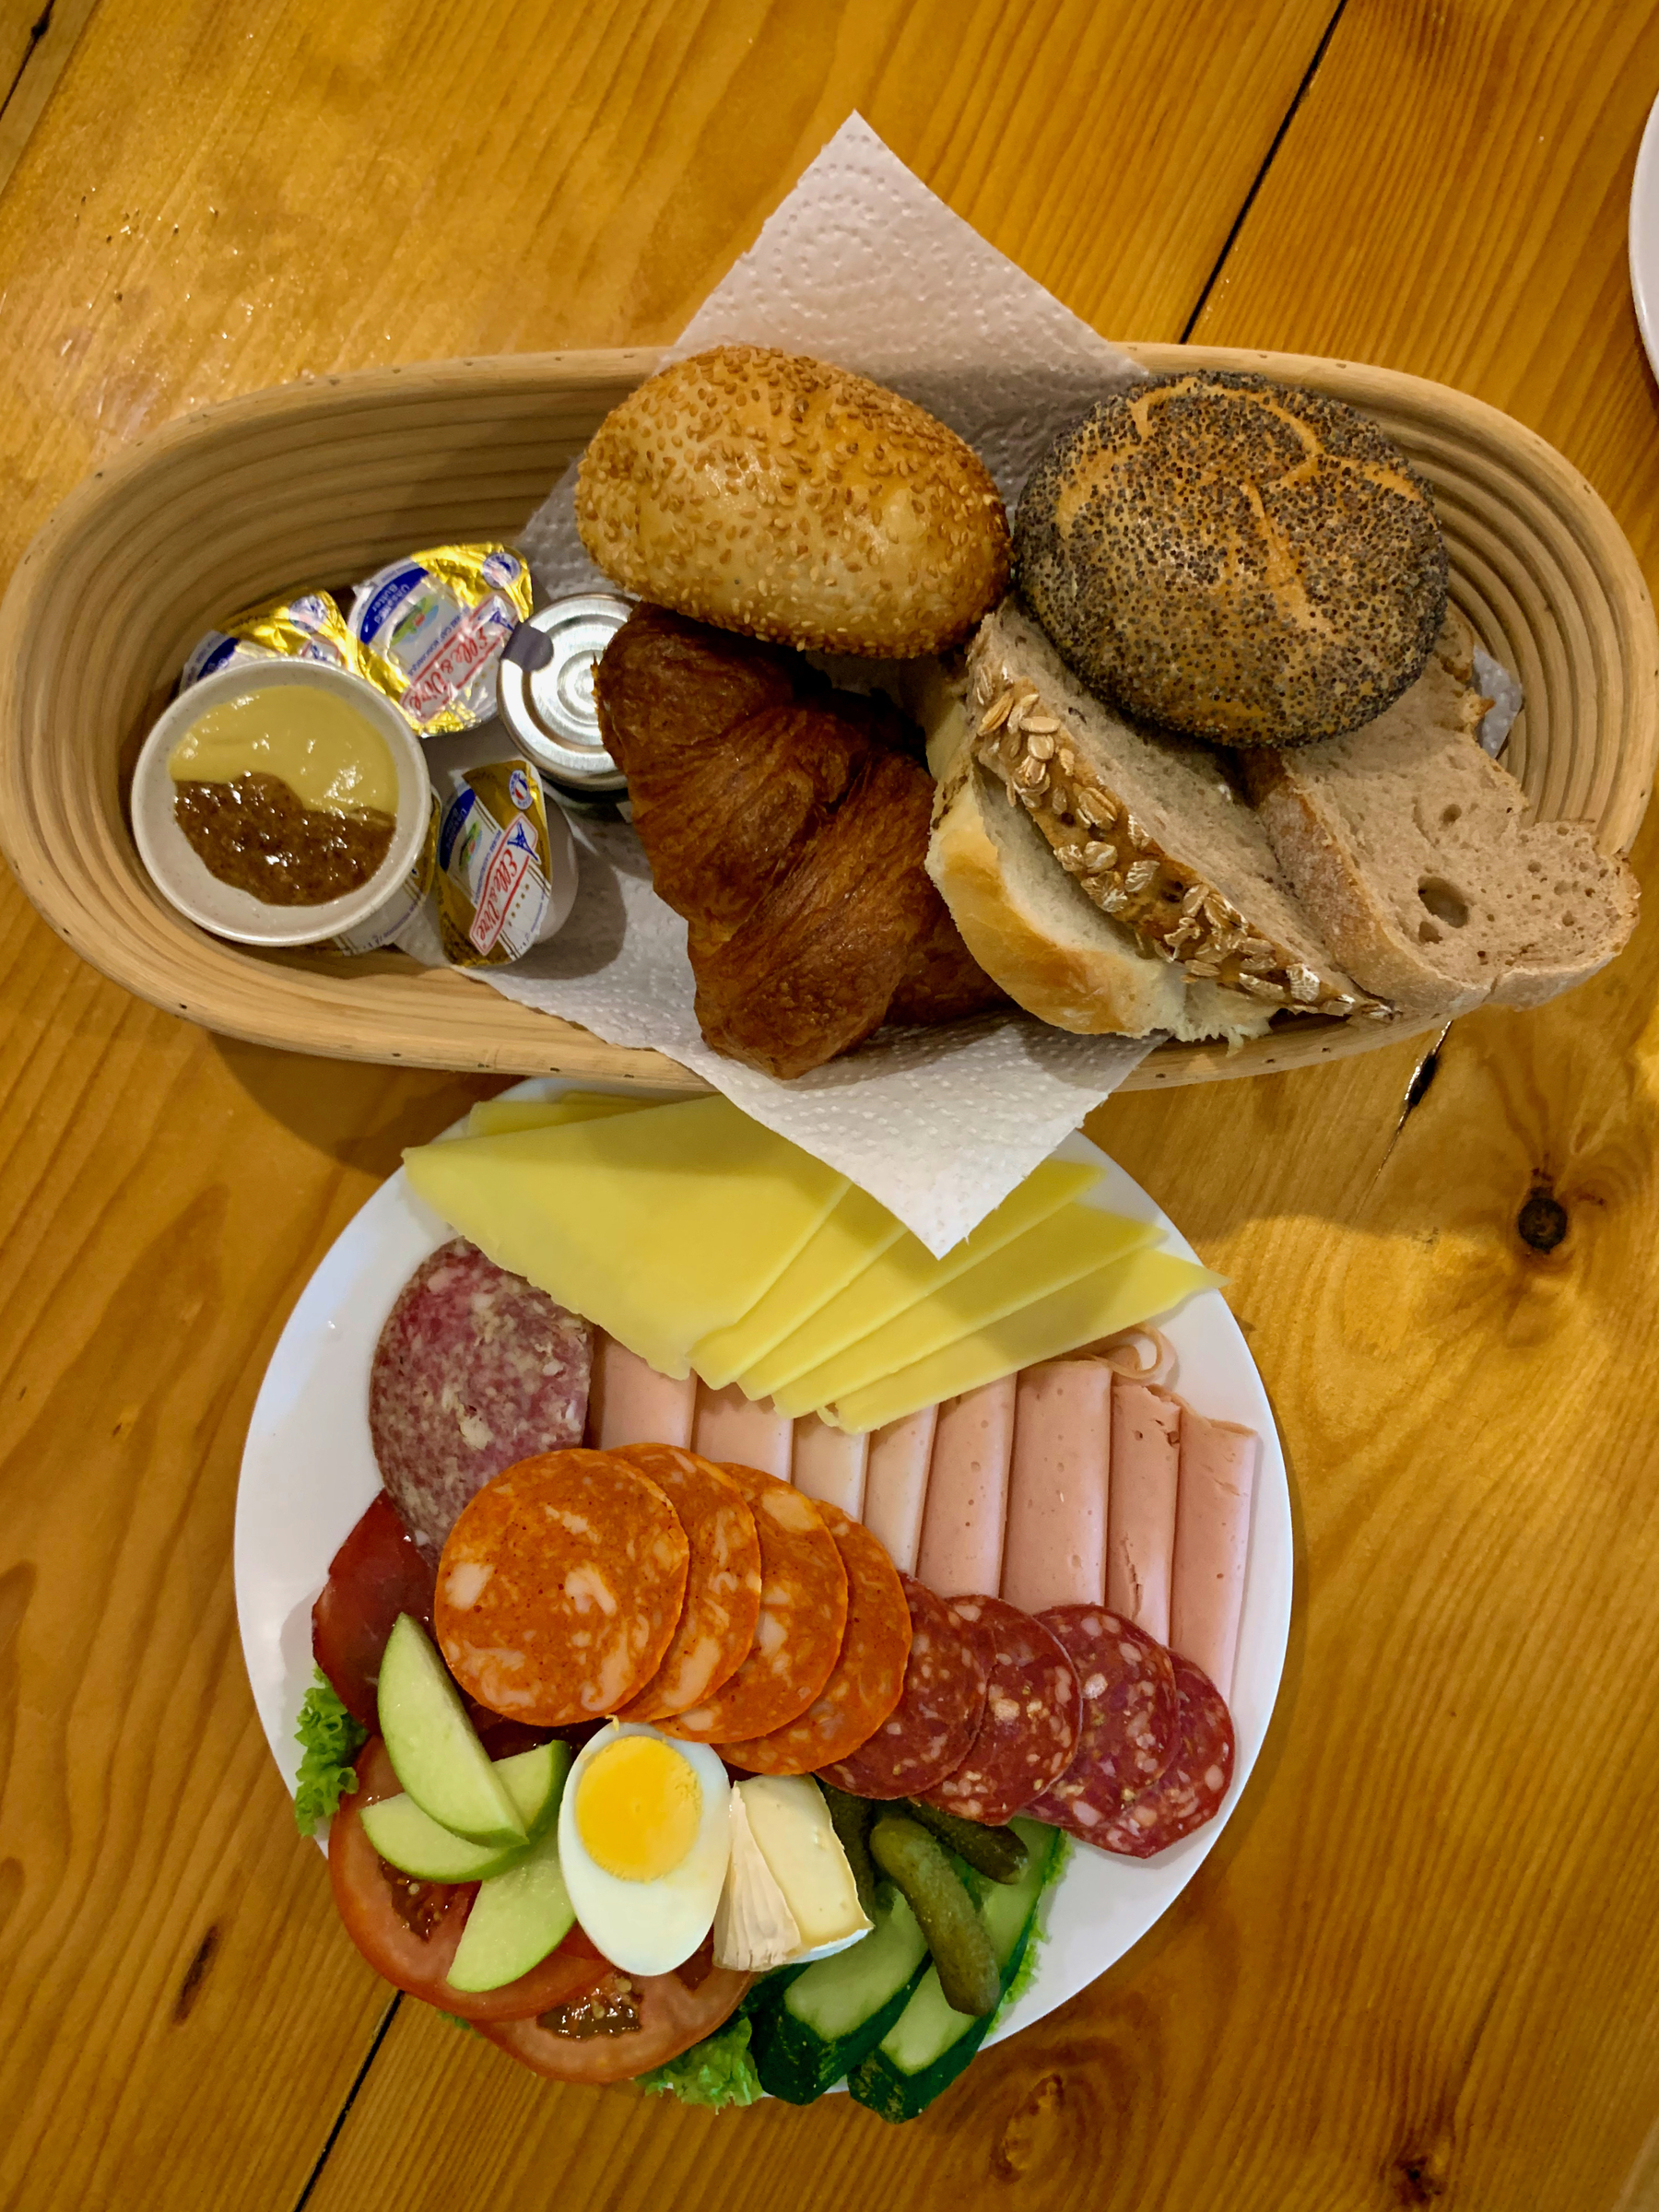  A big platter of cold cuts - ham, salami, cheese, along with a basket of breads, butter and jam